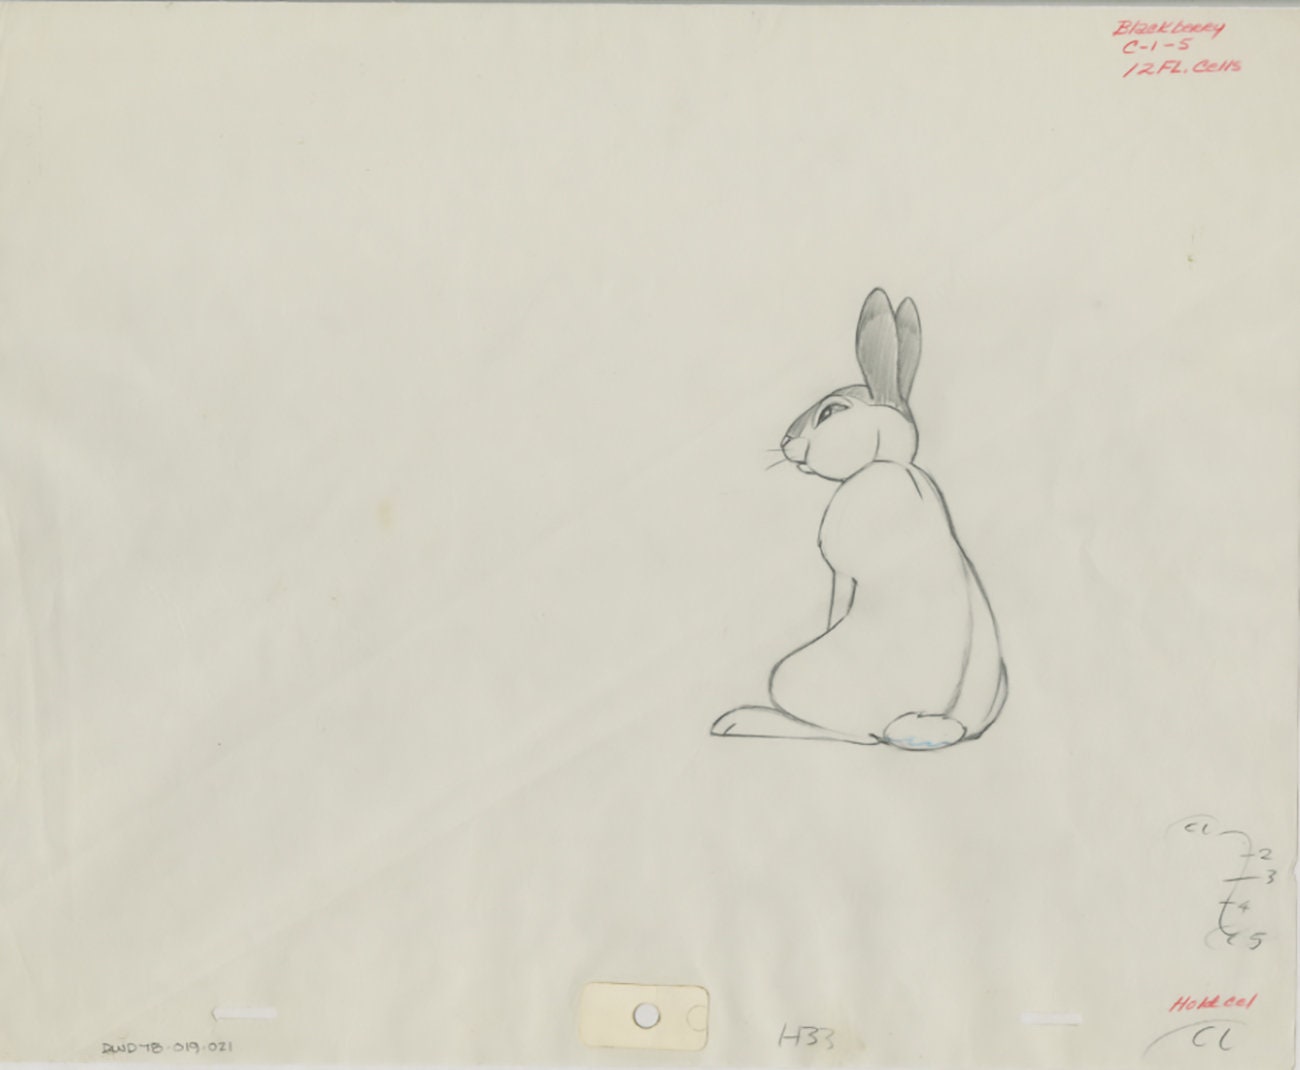 Watership Down 1978 Production Animation Cel Drawing with Linda Jones Enterprise Seal and Certificate of Authenticity 019-021